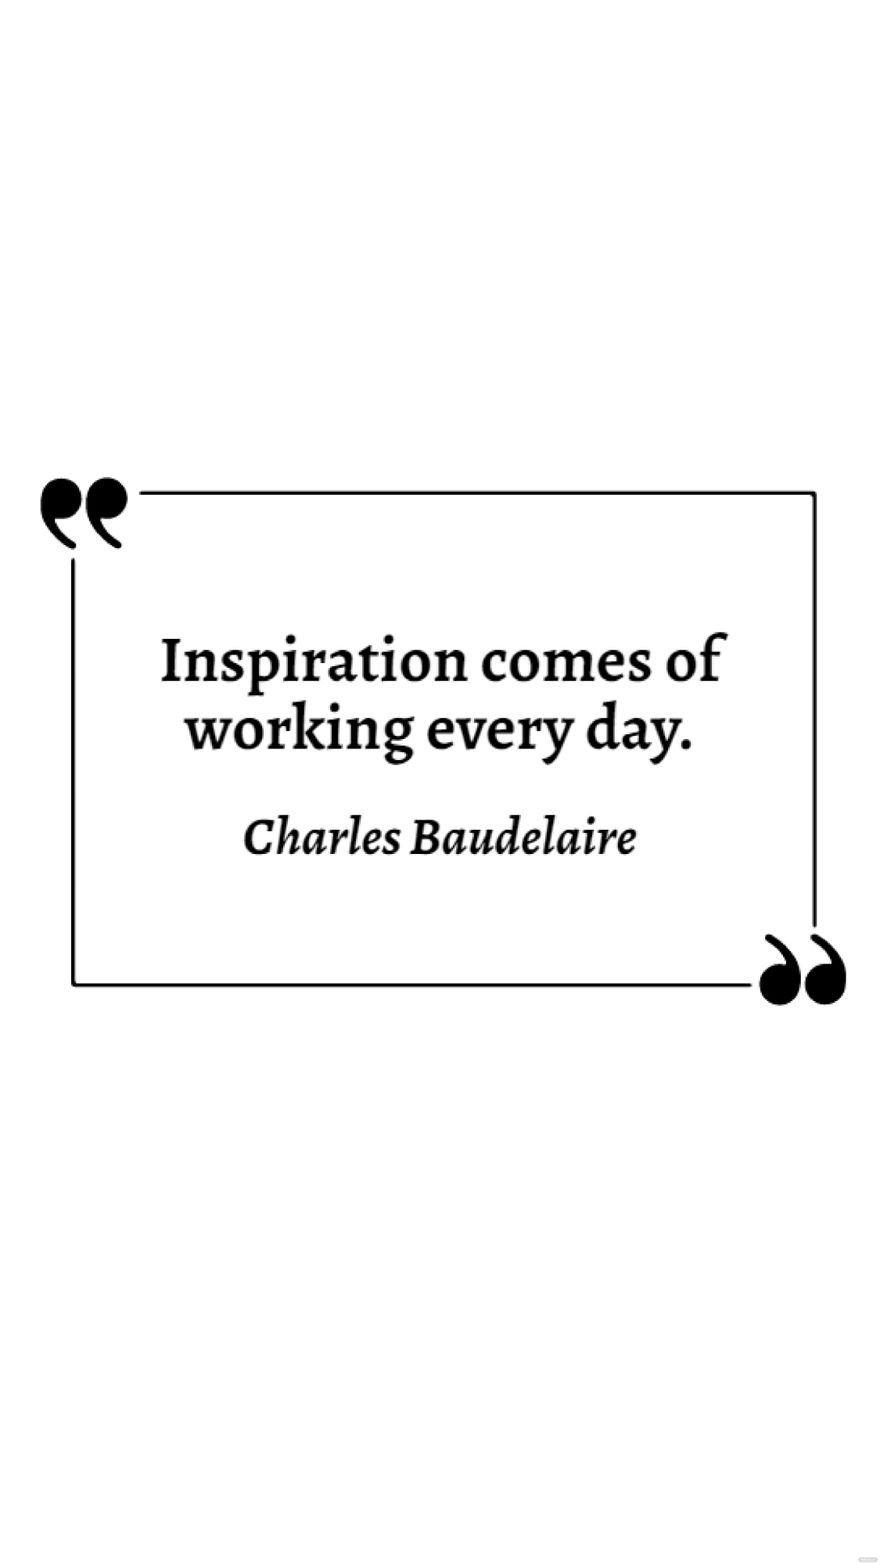 Free Charles Baudelaire - Inspiration comes of working every day. in JPG